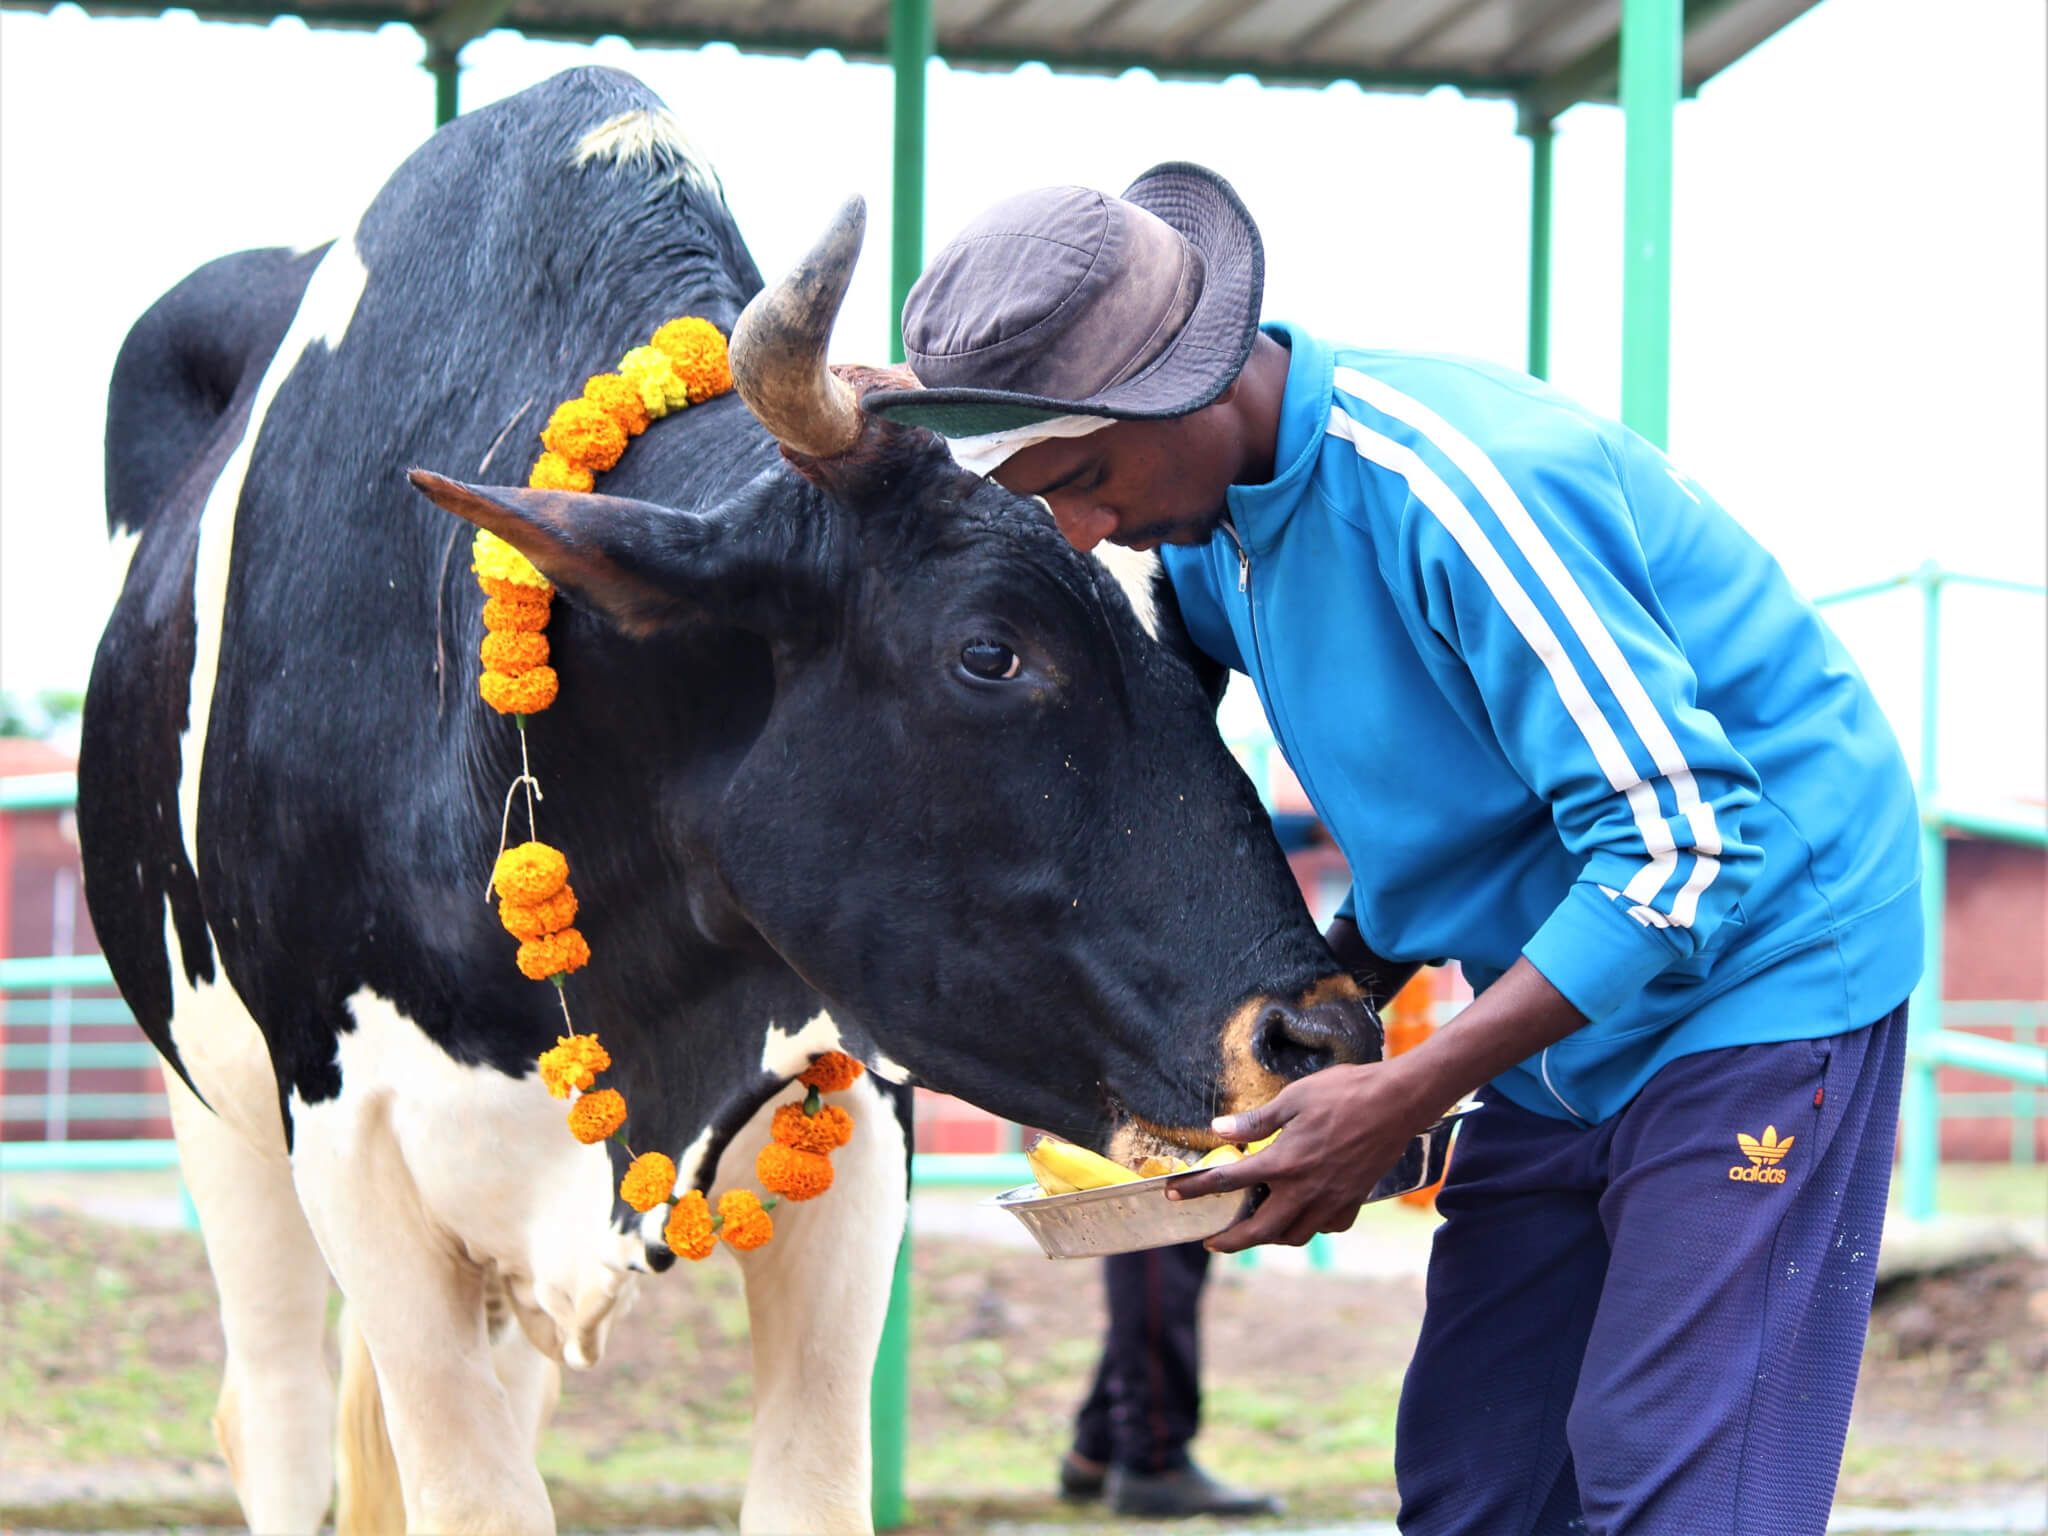 Bullock Bandya nuzzles his caregiver as he snacks on some bananas.